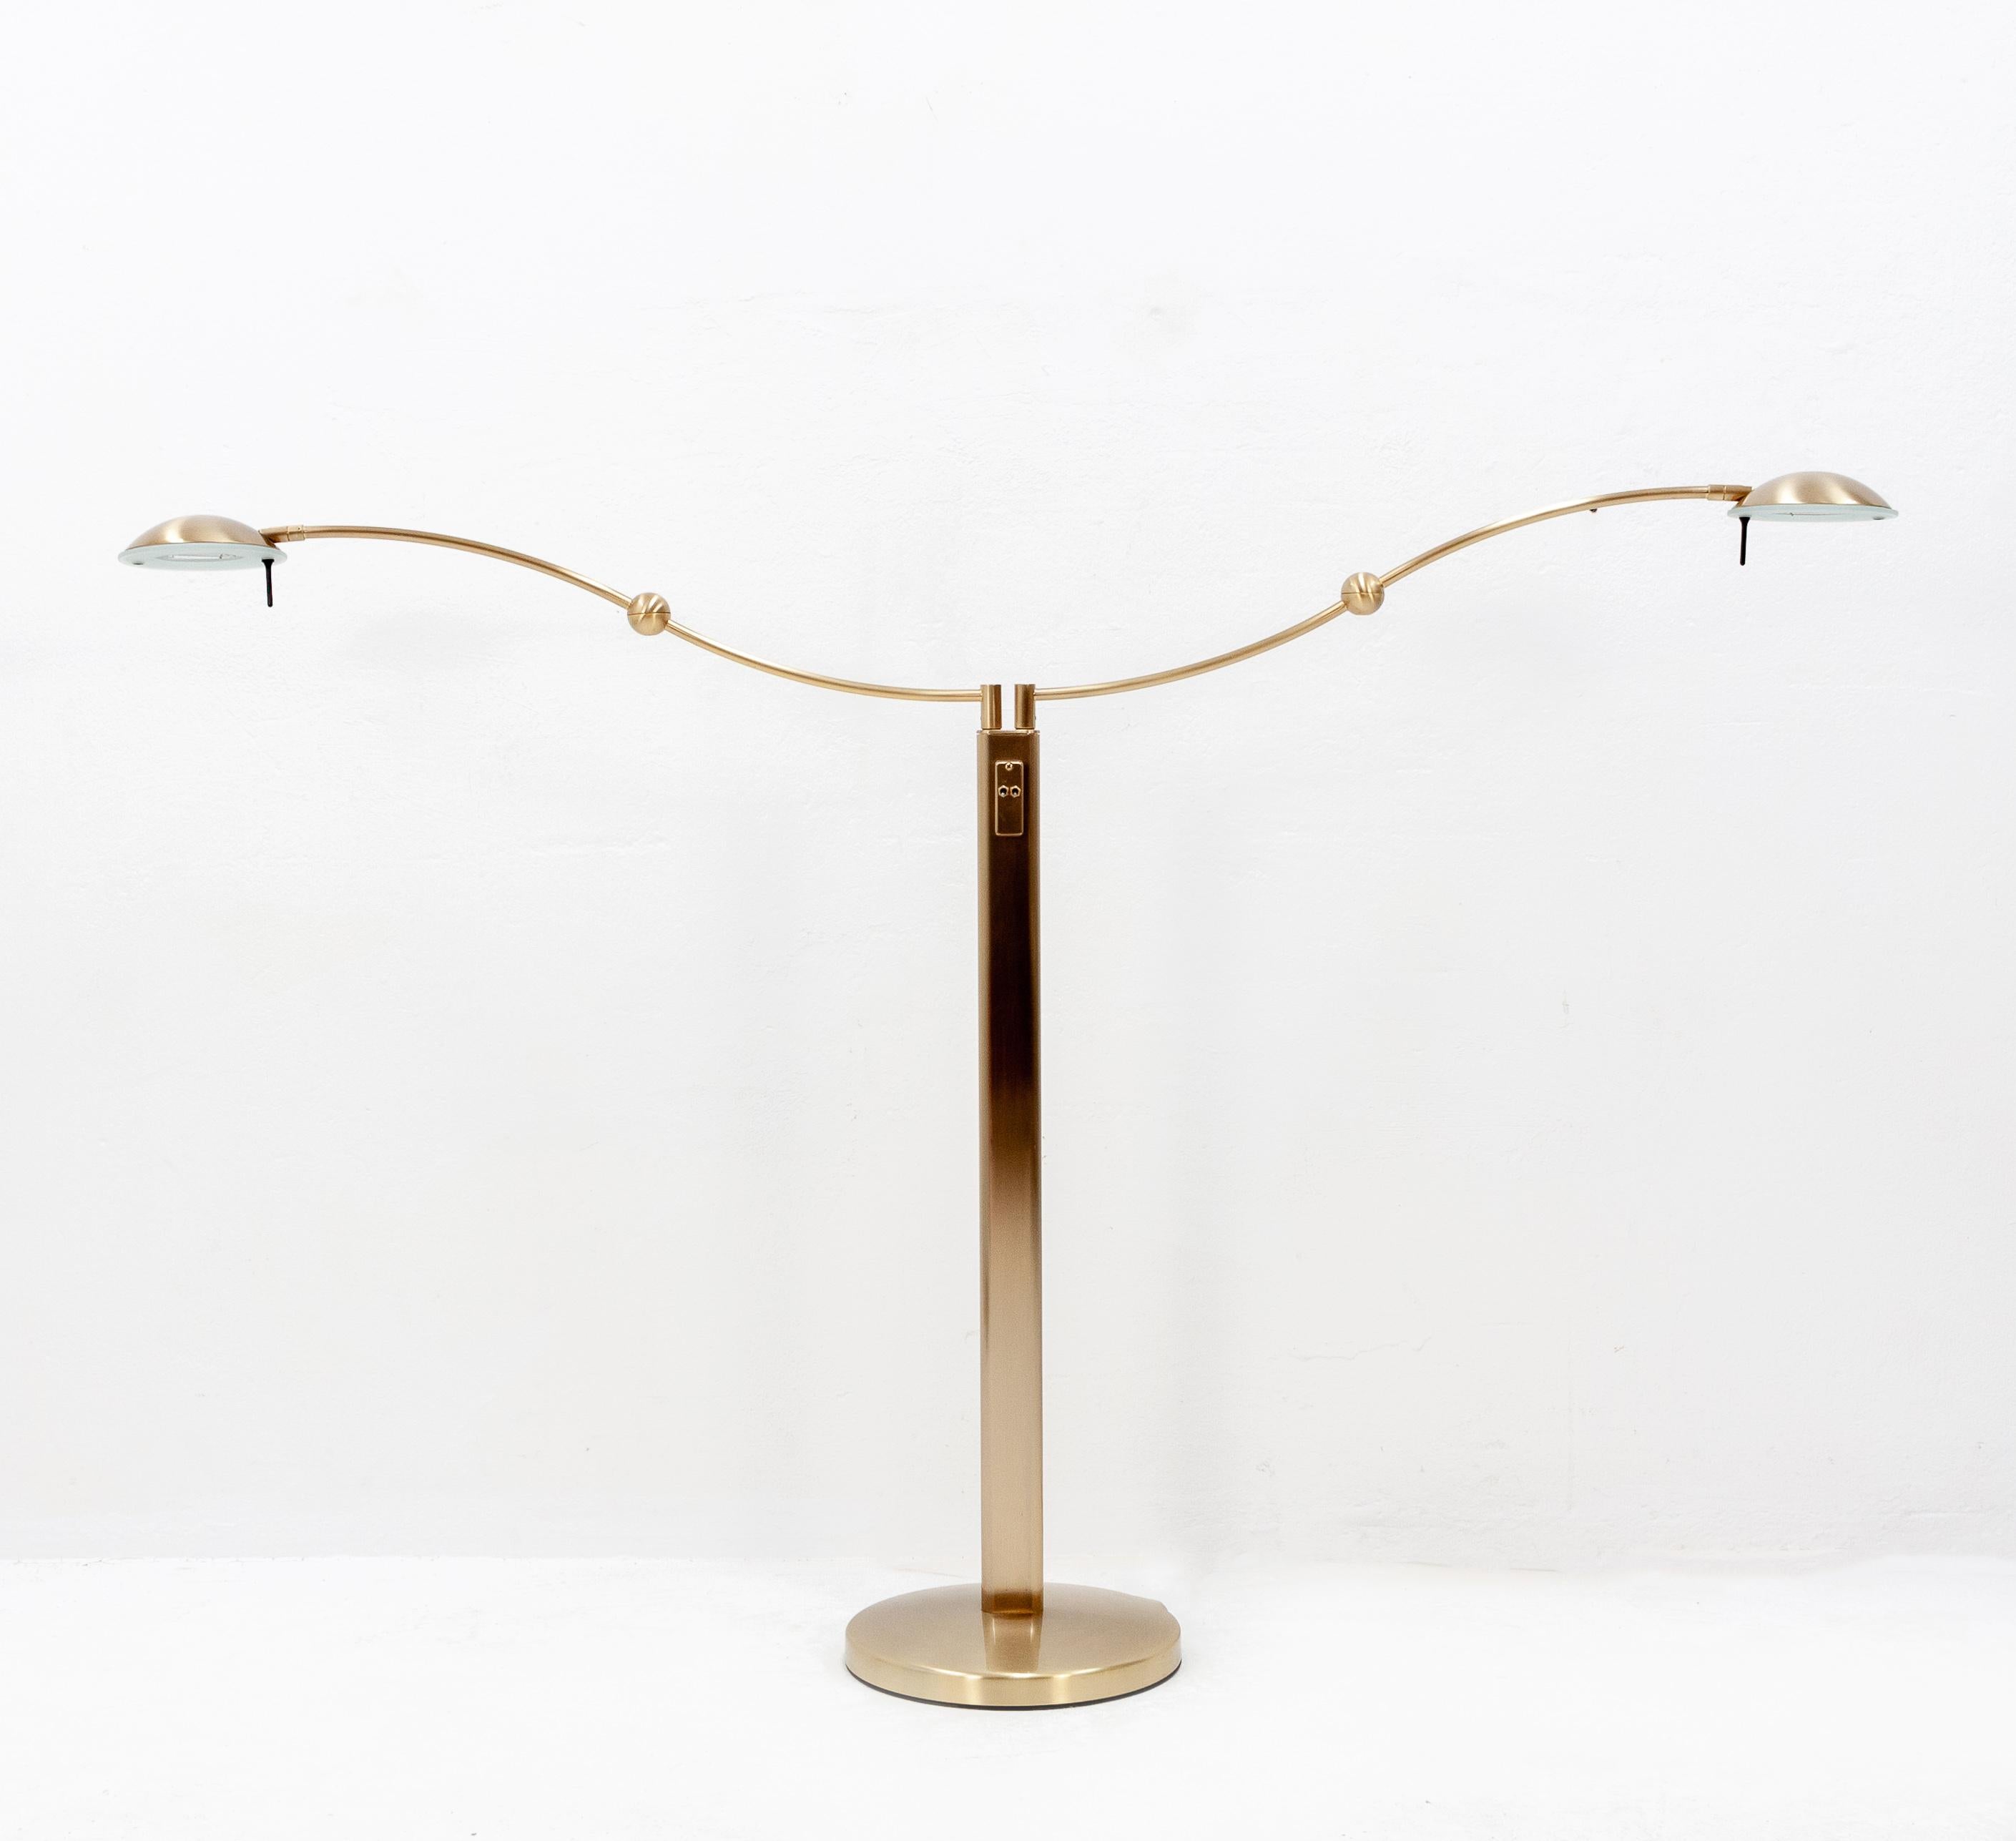 Beautiful dual-arm halogen floor lamp. Individually height adjustable and finished in a satin rose gold. Two position switch. Very good condition, 1980s.